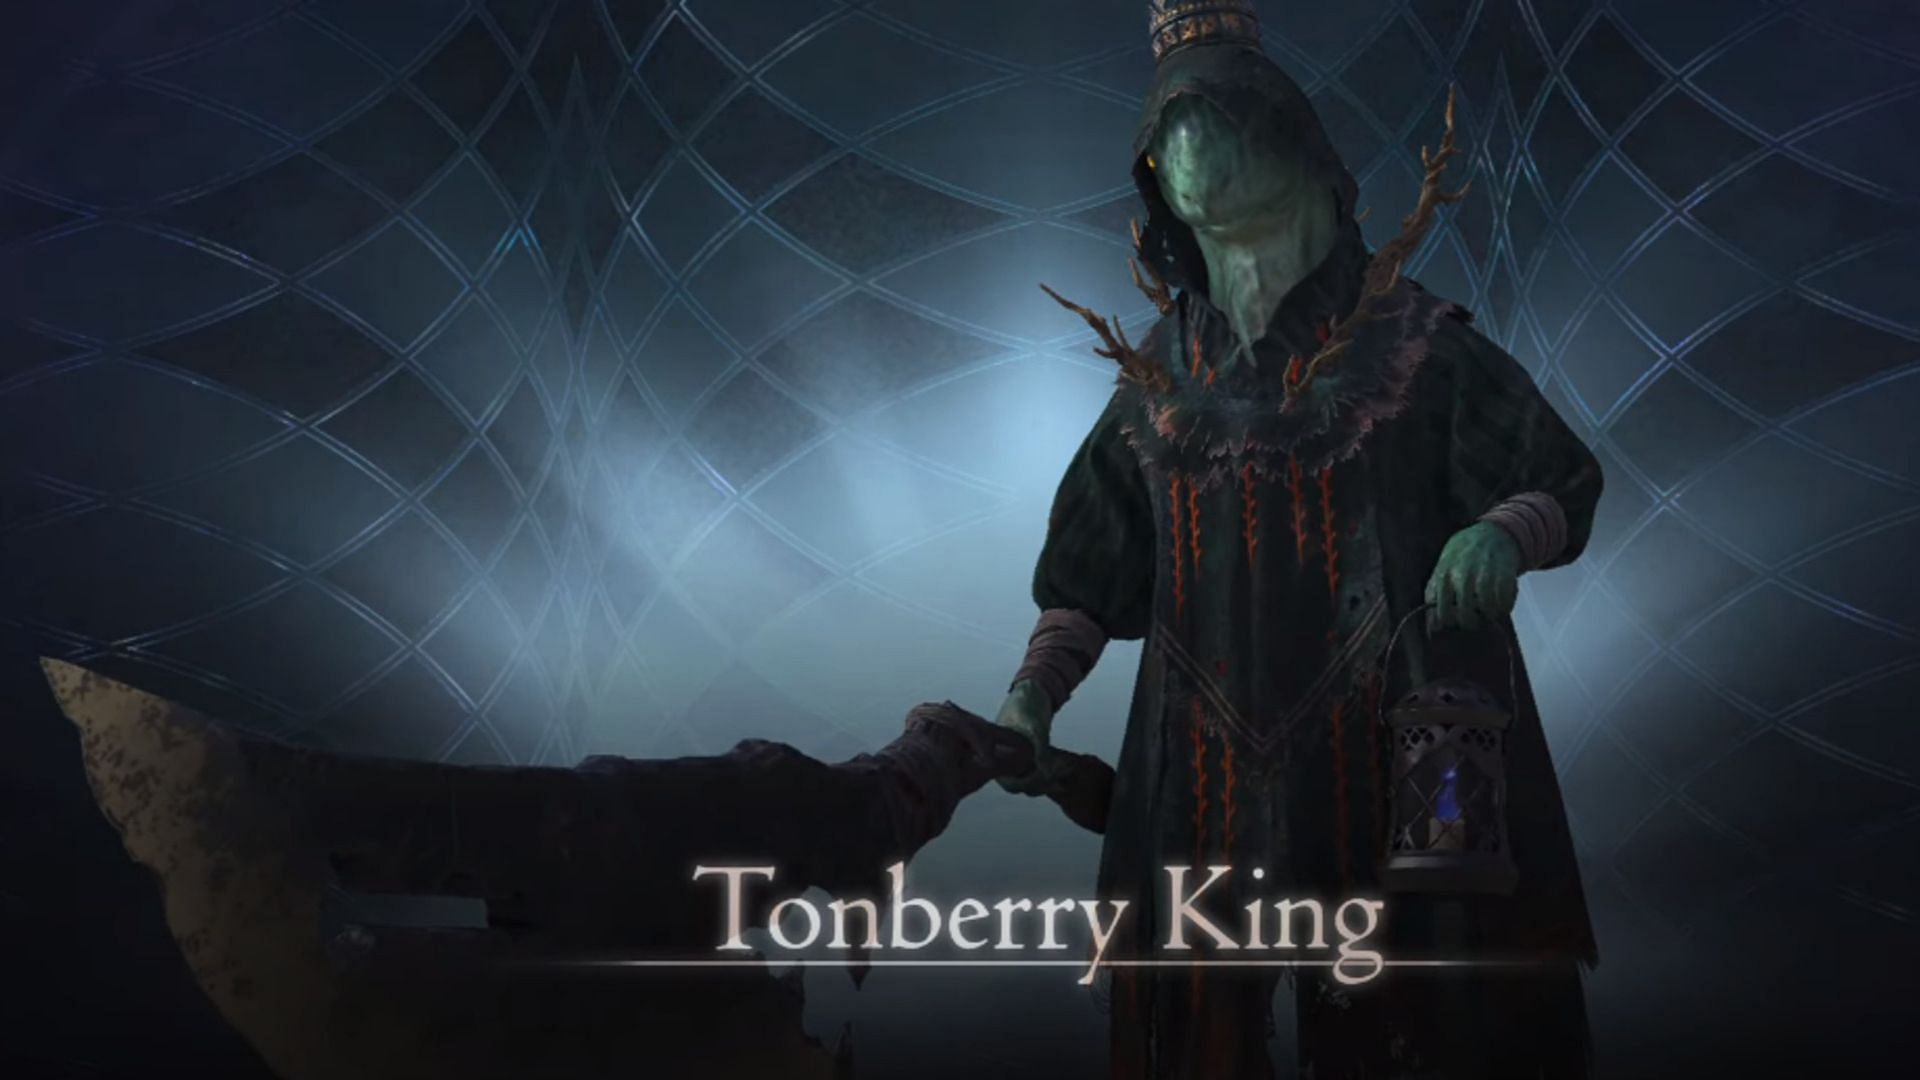 The Tonberry King in FF16 (Image via Square Enix)